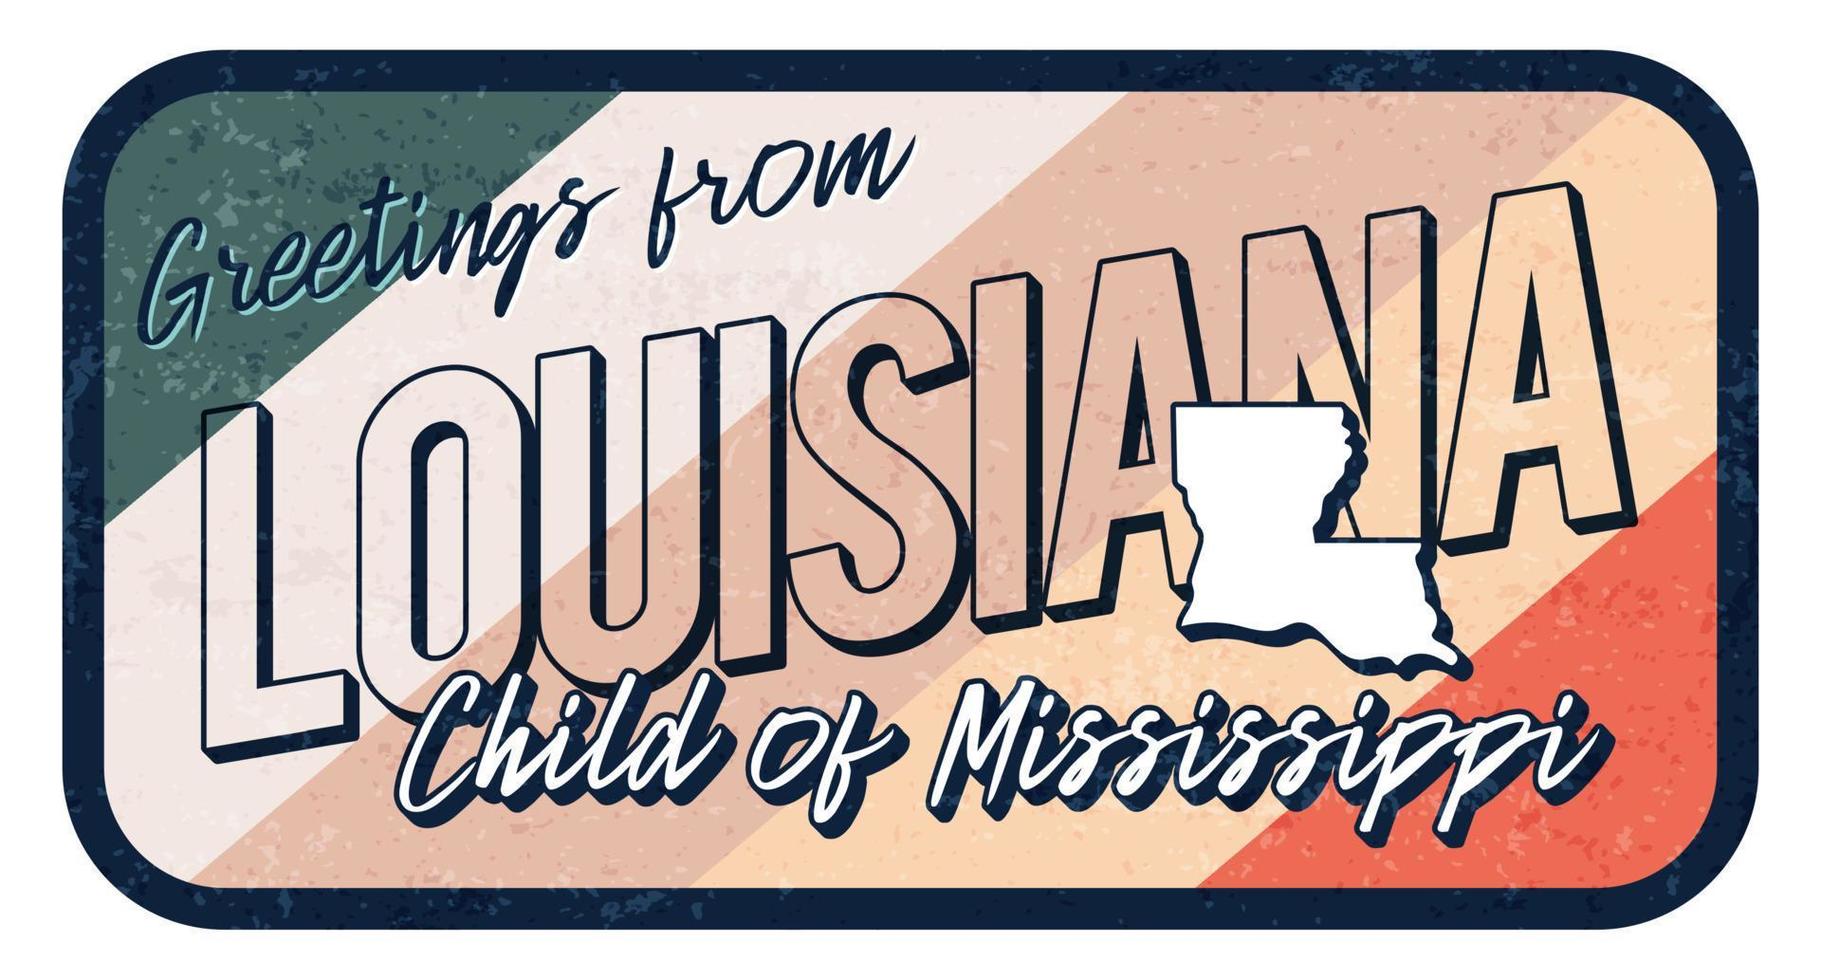 Greeting from Louisiana vintage rusty metal sign vector illustration. Vector state map in grunge style with Typography hand drawn lettering